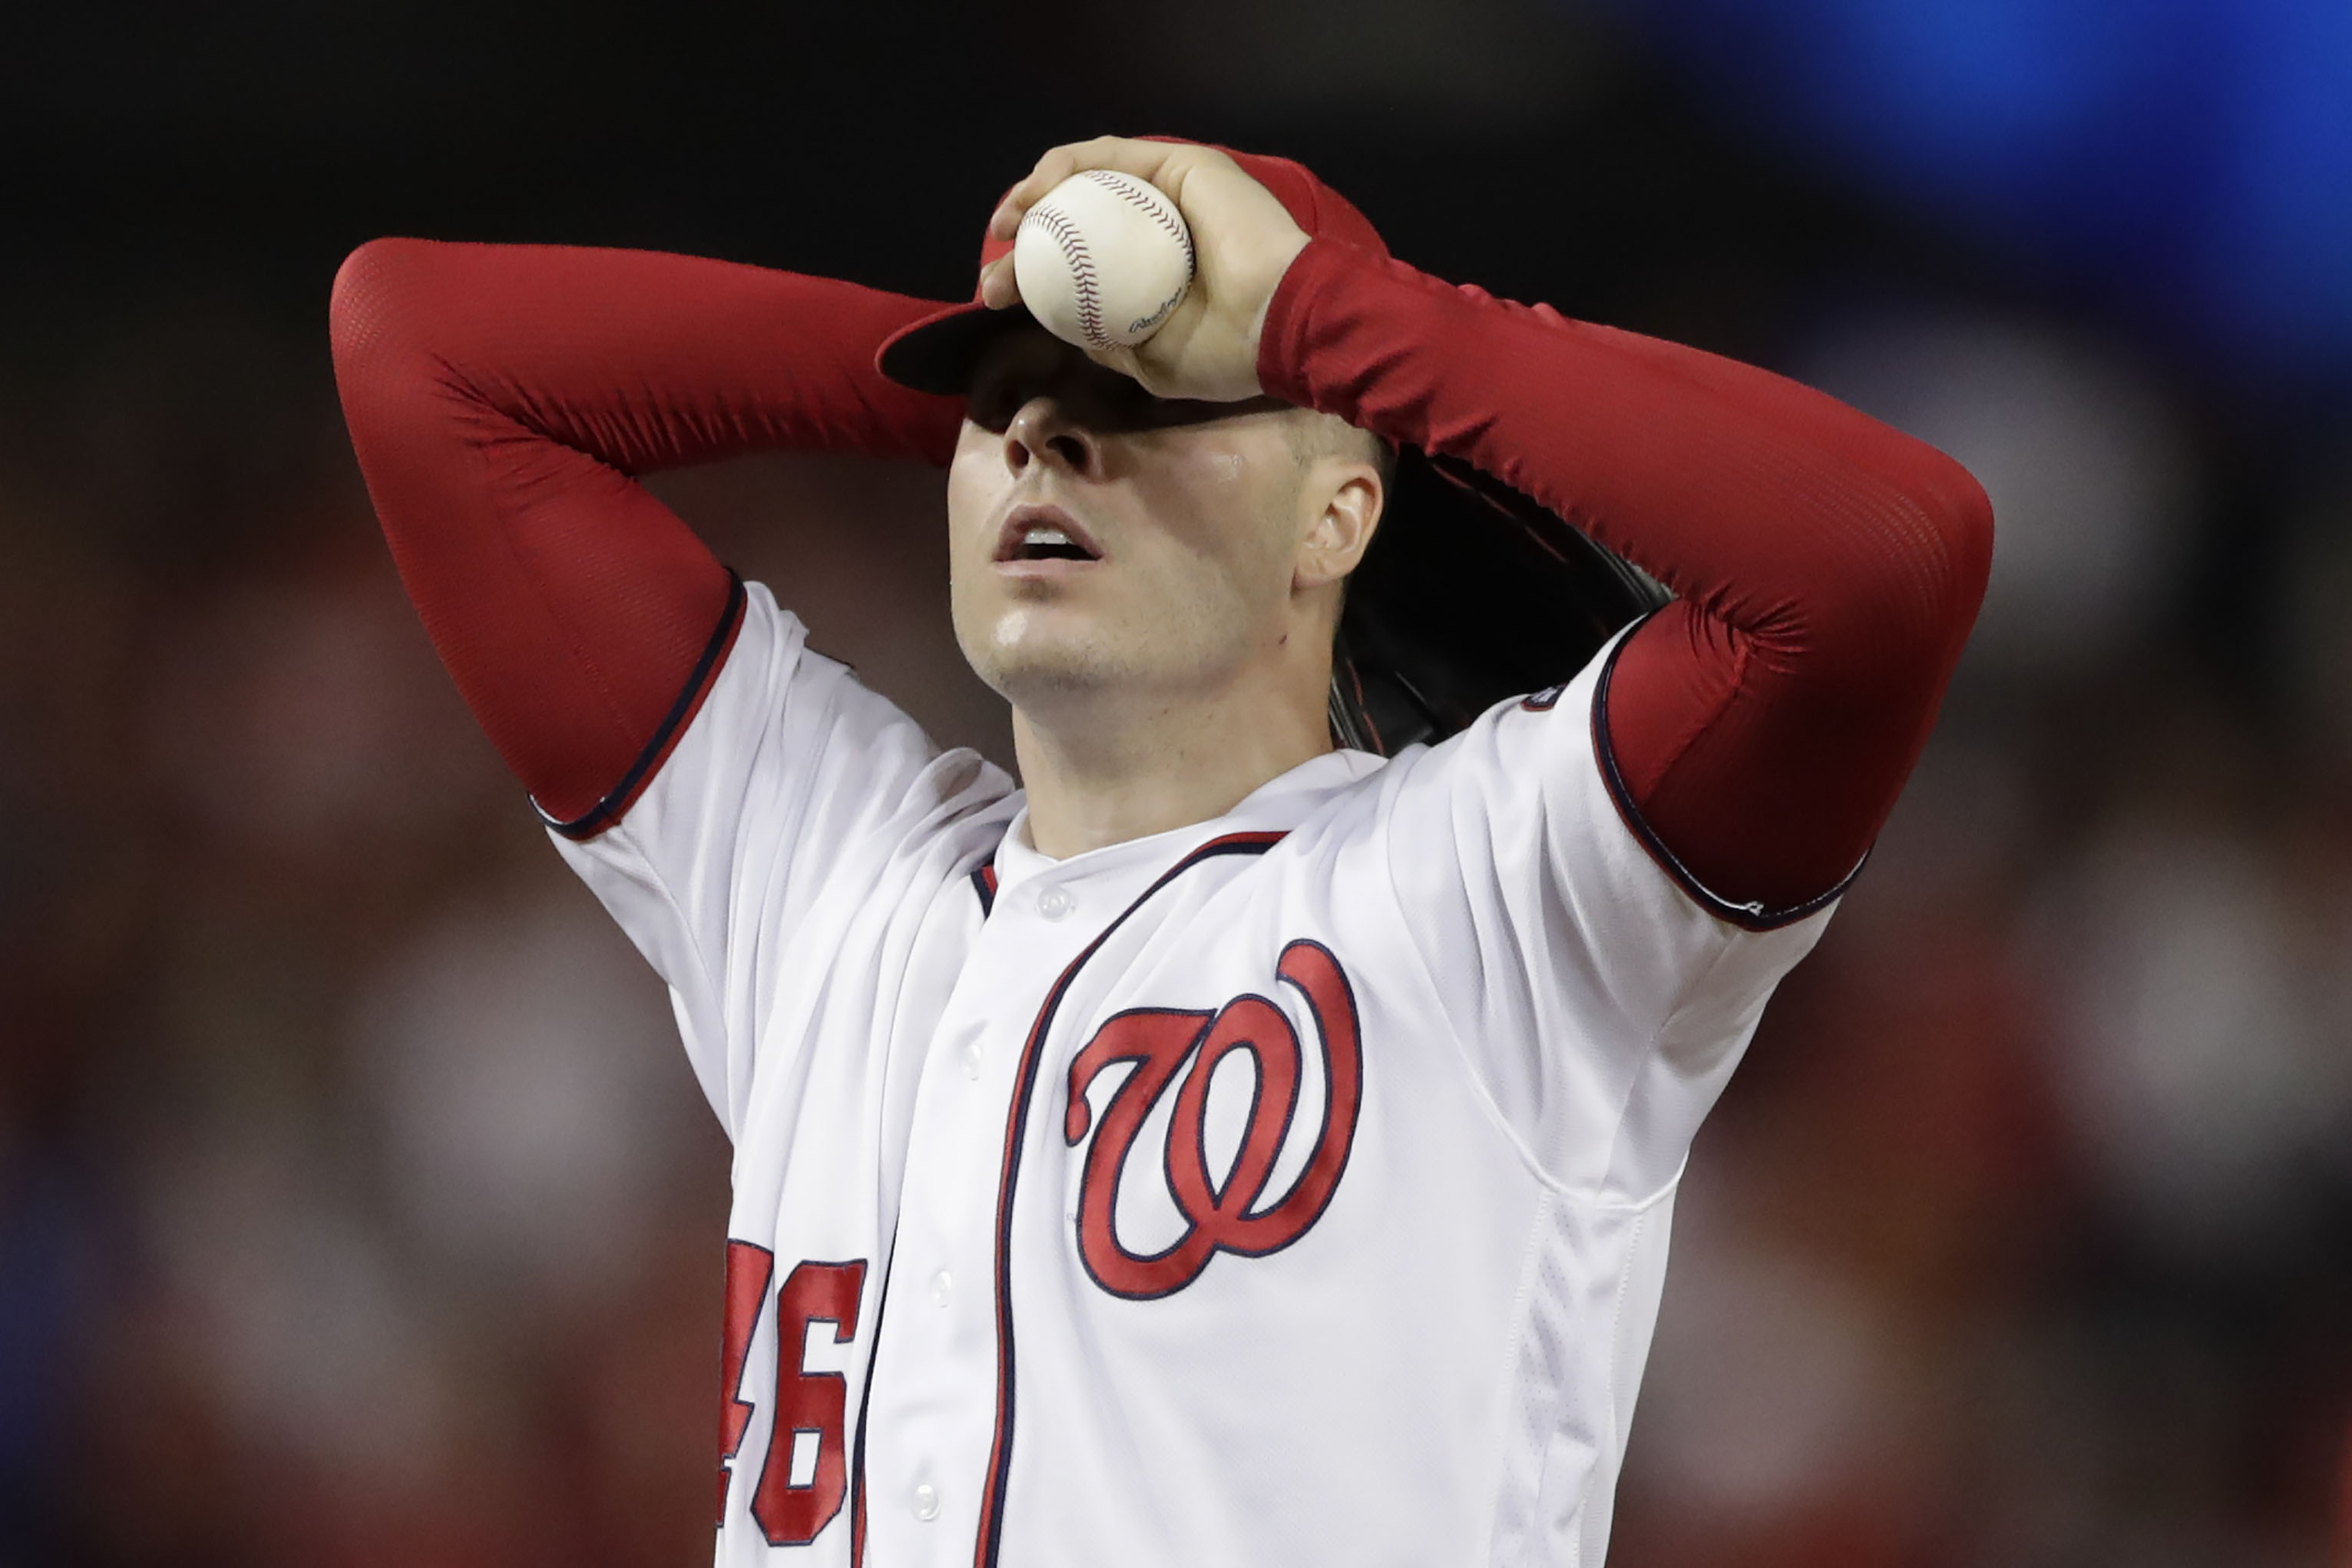 No relief: Corbin goes from starting to 'pen and Nats lose